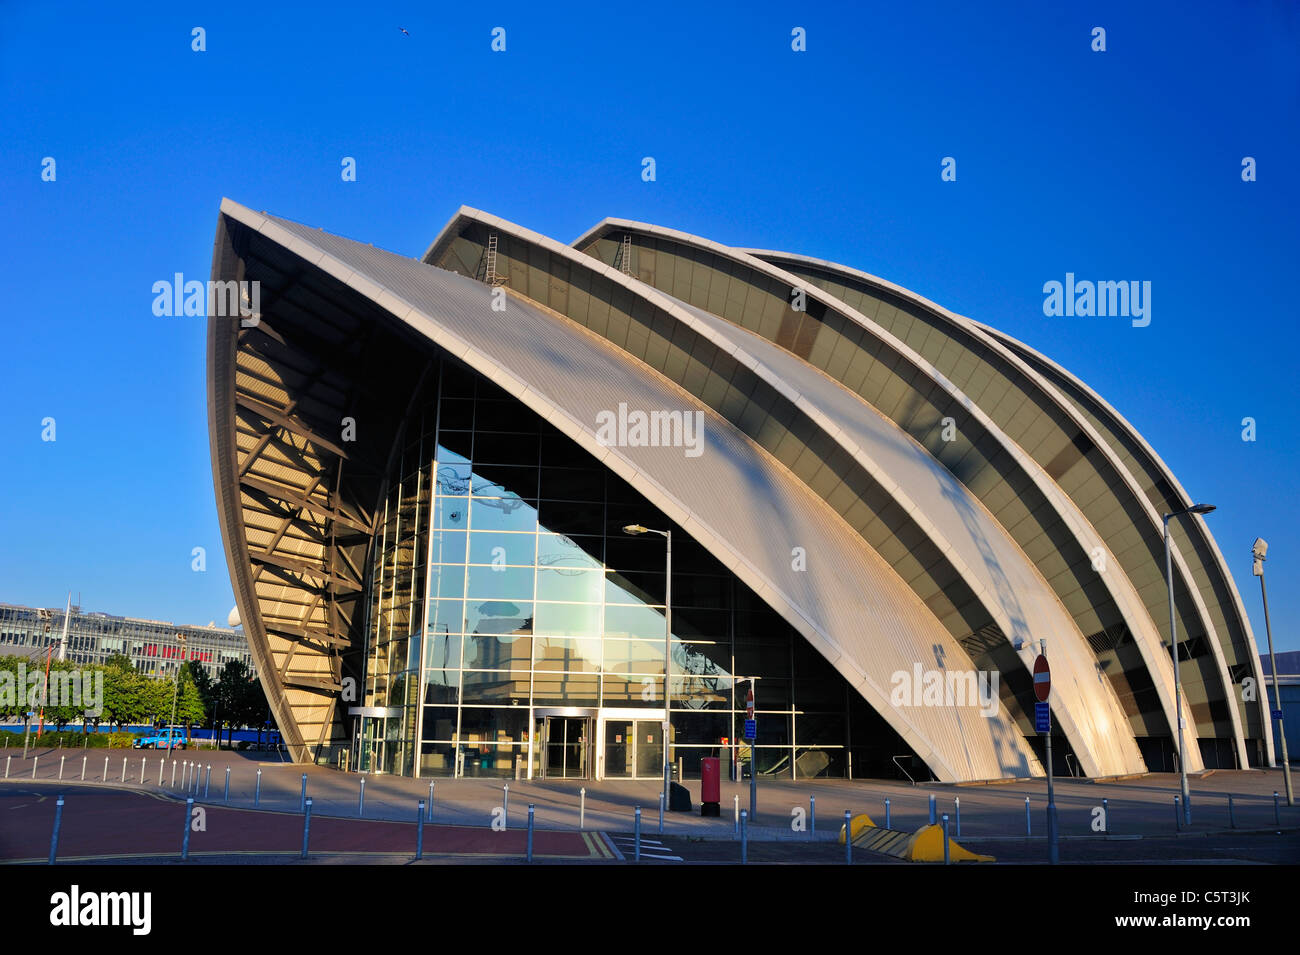 The Clyde Auditorium in the Scottish Exhibition and Conference Centre Stock Photo